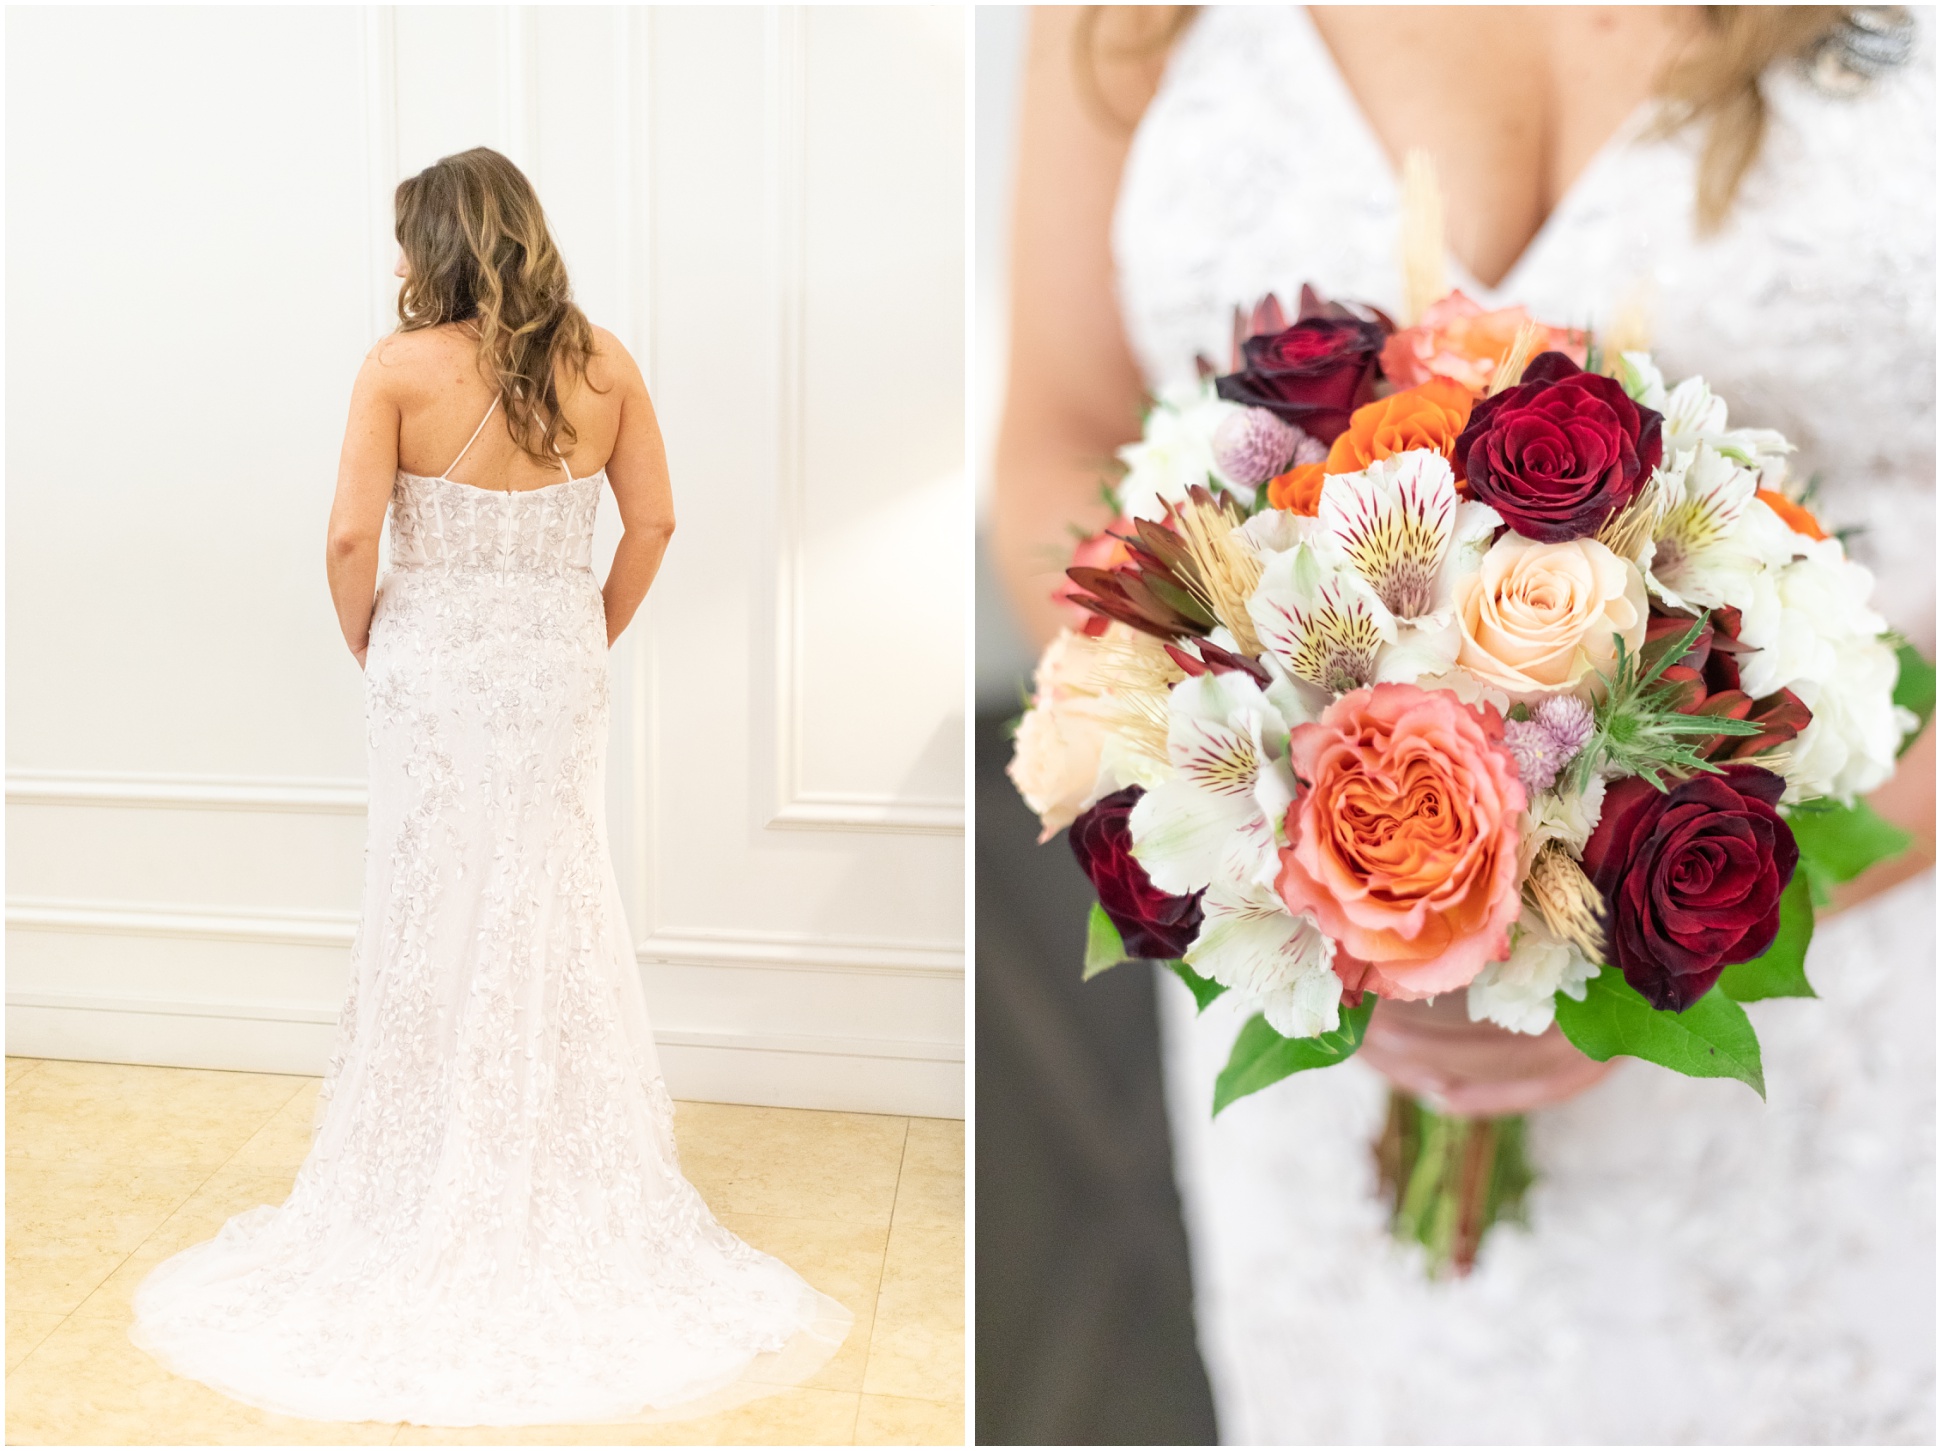 Left: Bride at Delta Hotel, right: beautiful bouquet with red and peach roses